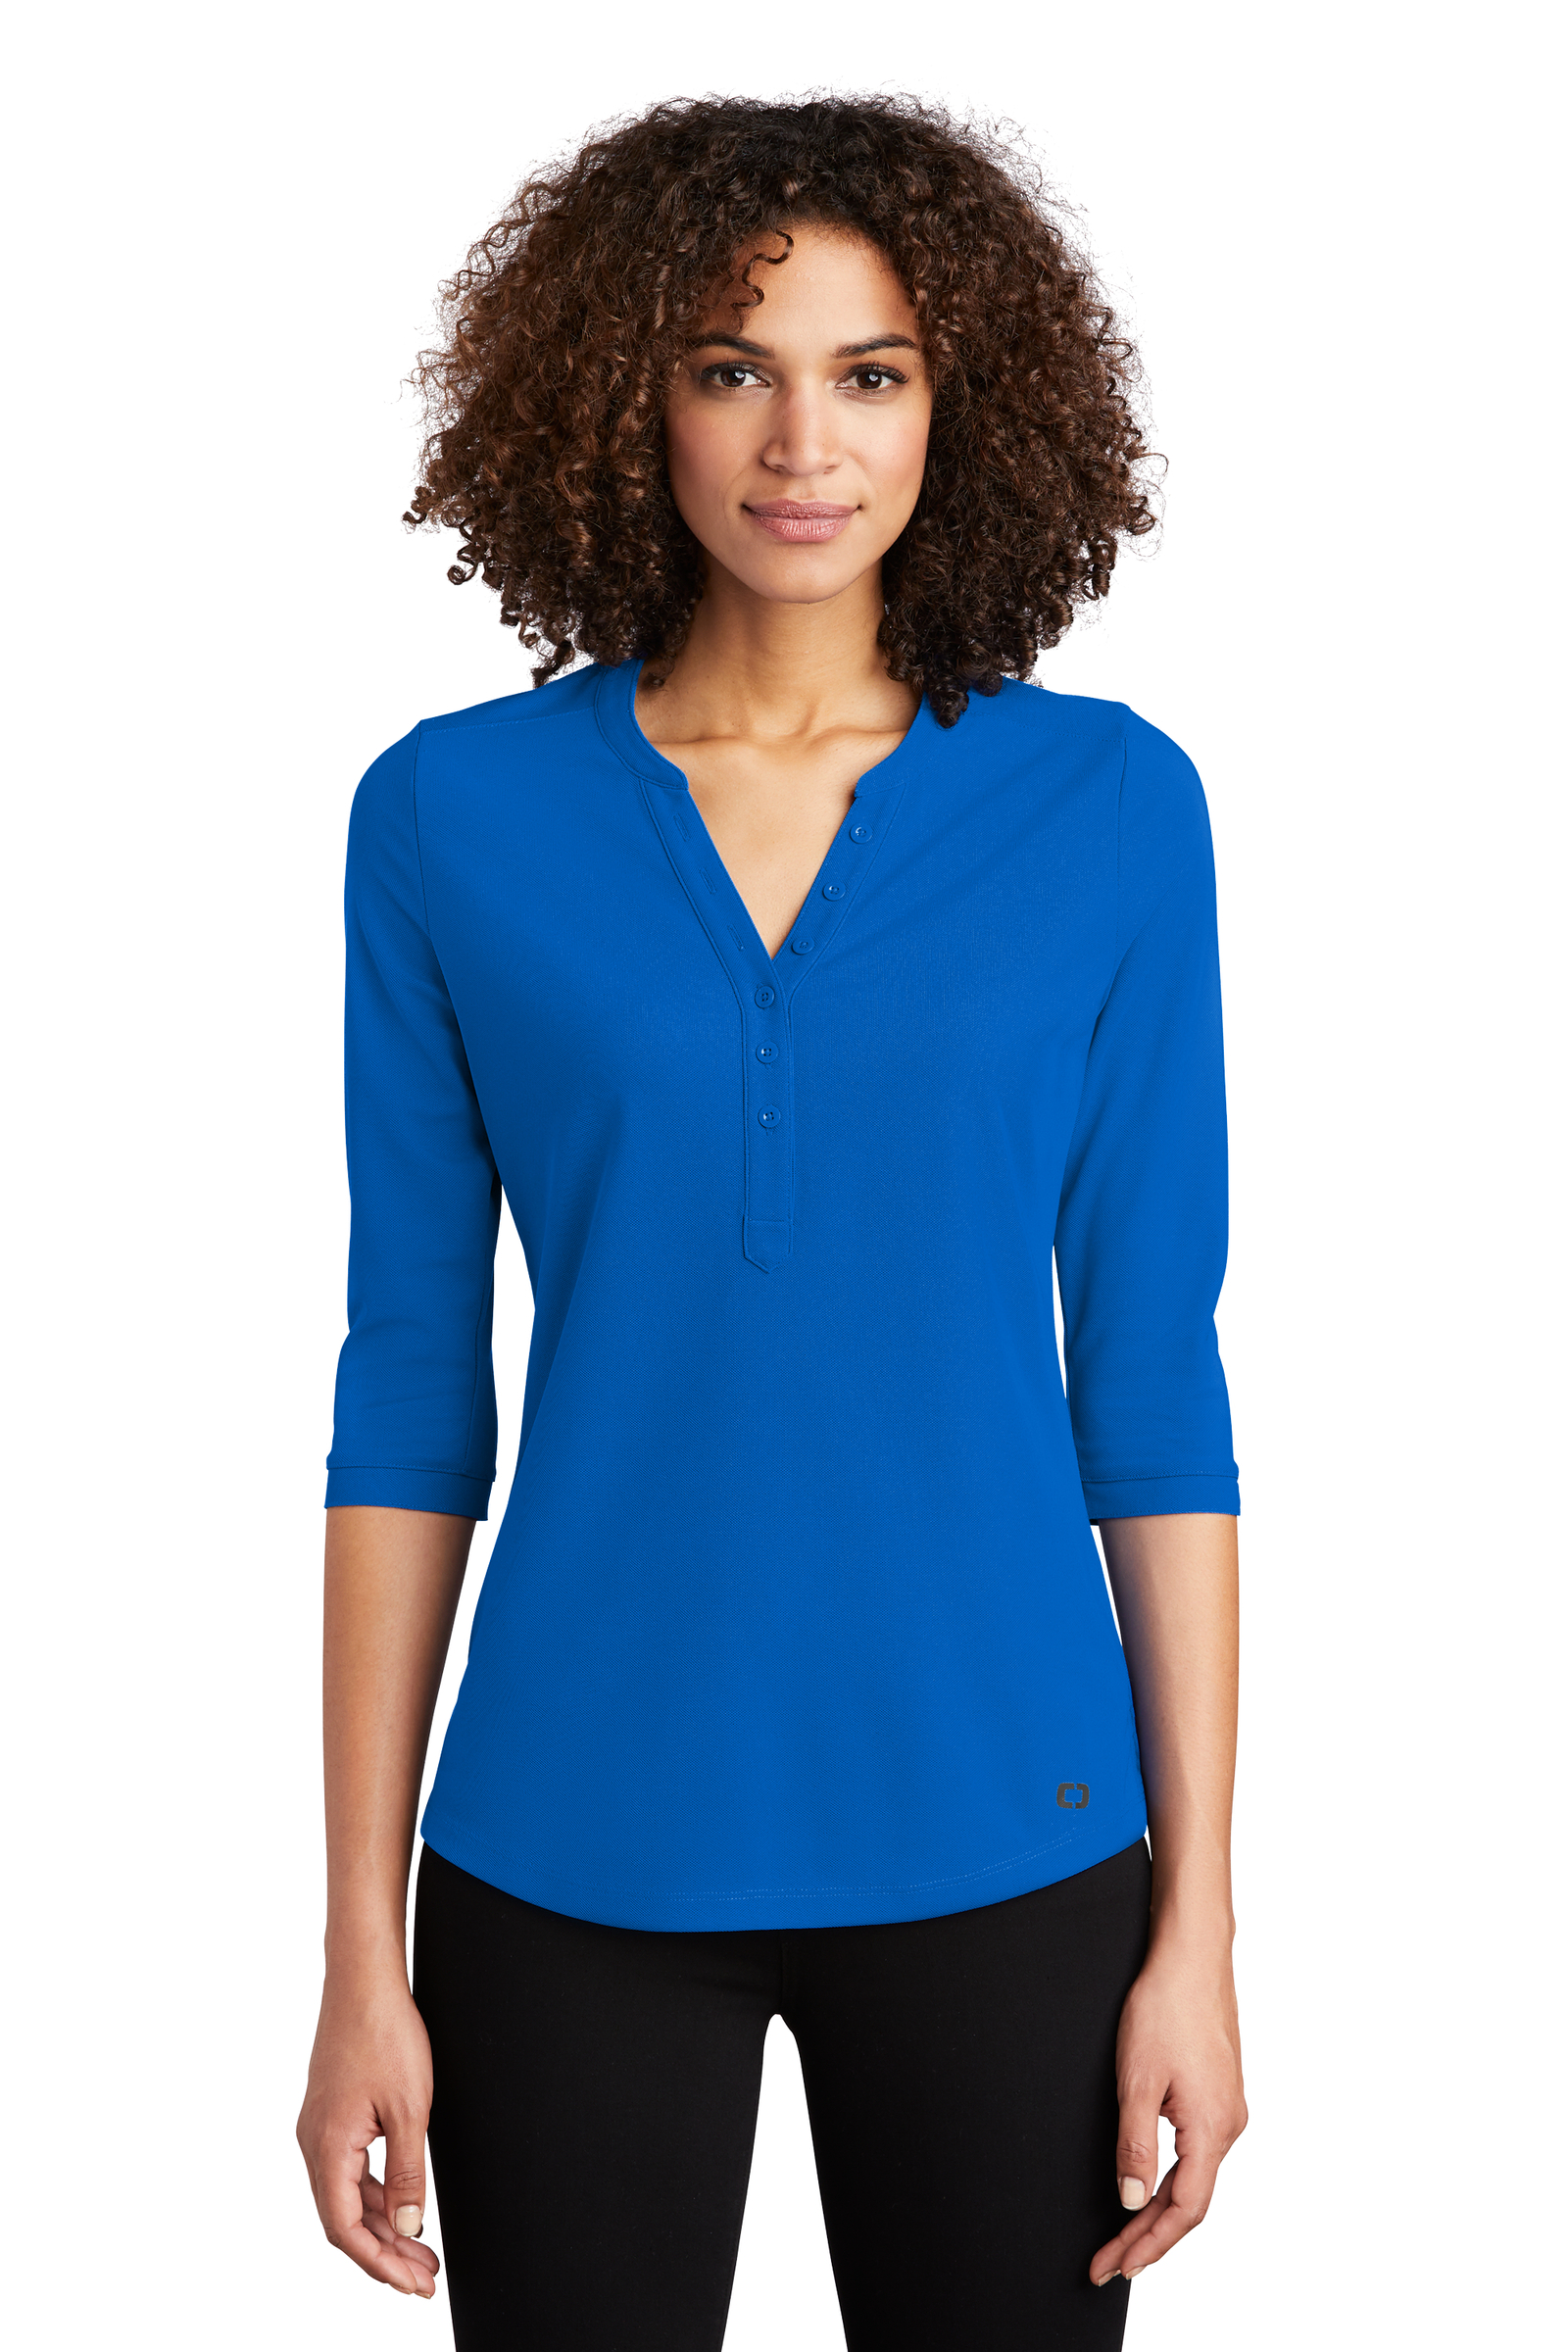 OGIO Embroidered Women's Jewel Henley